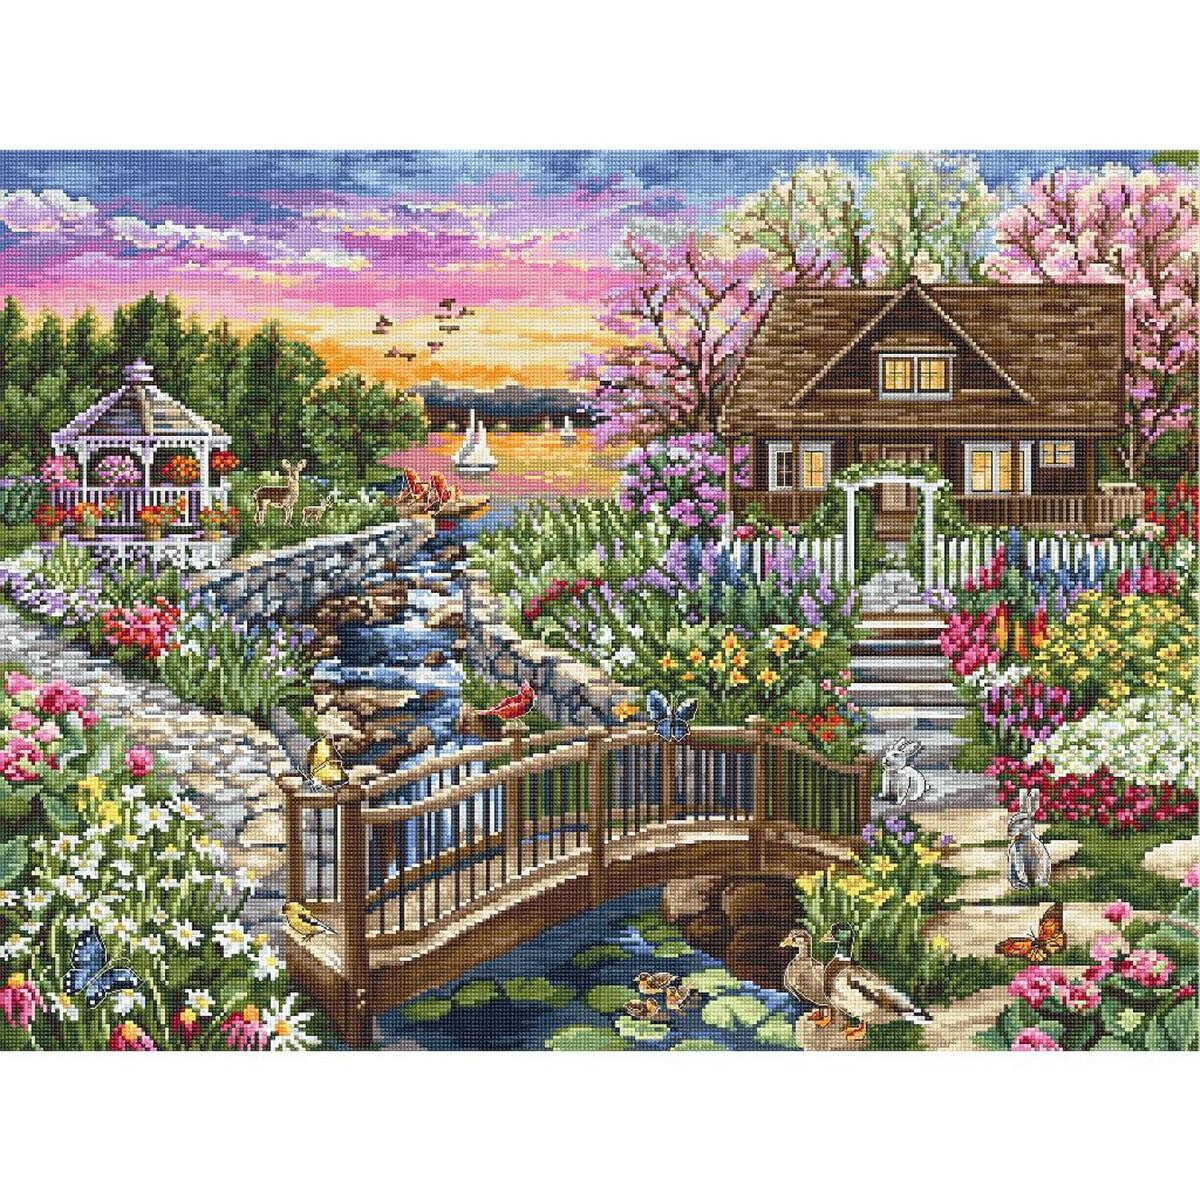 A lively, detailed garden scene with a wooden bridge over...